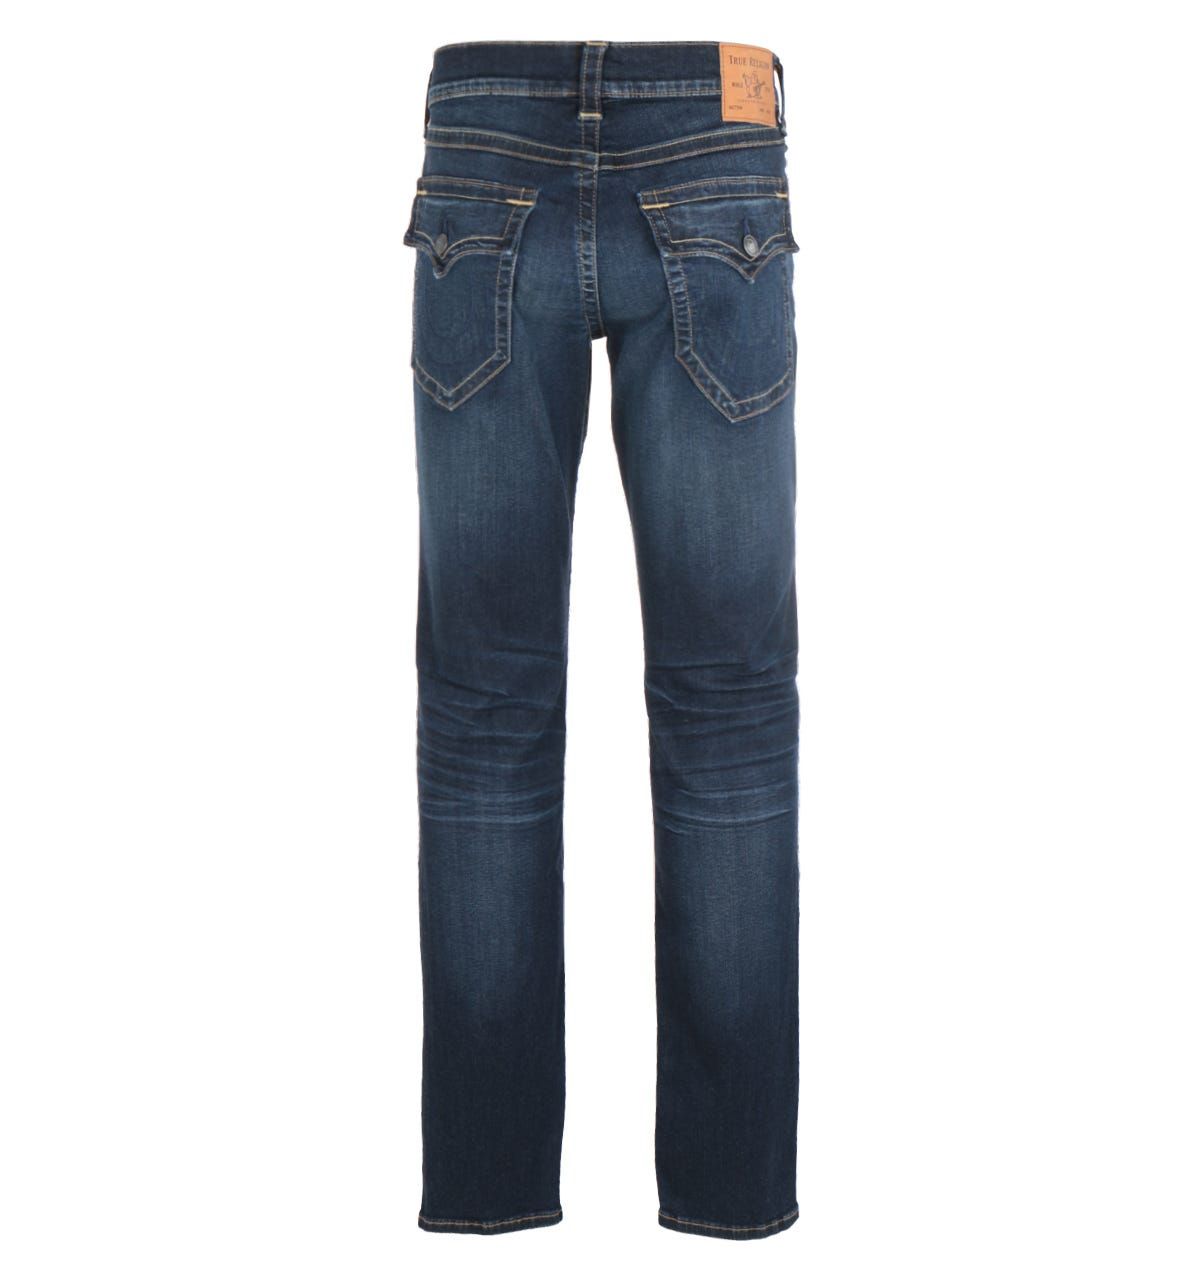 <p>Upgrade your wardrobe with the Ricky Straight Flap Jeans in Dark Fusion Blue by True Religion\nTrue Religion are global denim experts who have redesigned and reinvented the traditional 5 pocket jean. They were founded in L.A. back in 2002 and quickly became known for quality craftsmanship, bold design and the iconic lucky horseshoe logo.</p><ul><li>Cotton blend construction</li><li>Subtle fading and 3D whiskering</li><li>Two-tone gold and tonal stitching</li><li>Antiqued hardware</li><li>Tonal horseshoe detailing along the back flap pockets</li><li>Five-pocket design</li></ul><p>Style & Fit:</p><ul><li>Relaxed straight front rise fit</li></ul><p>Fabric Composition & Care:</p><ul><li>88% Cotton 9% Polyester 3% Elastane</li><li>Machine wash</li></ul>